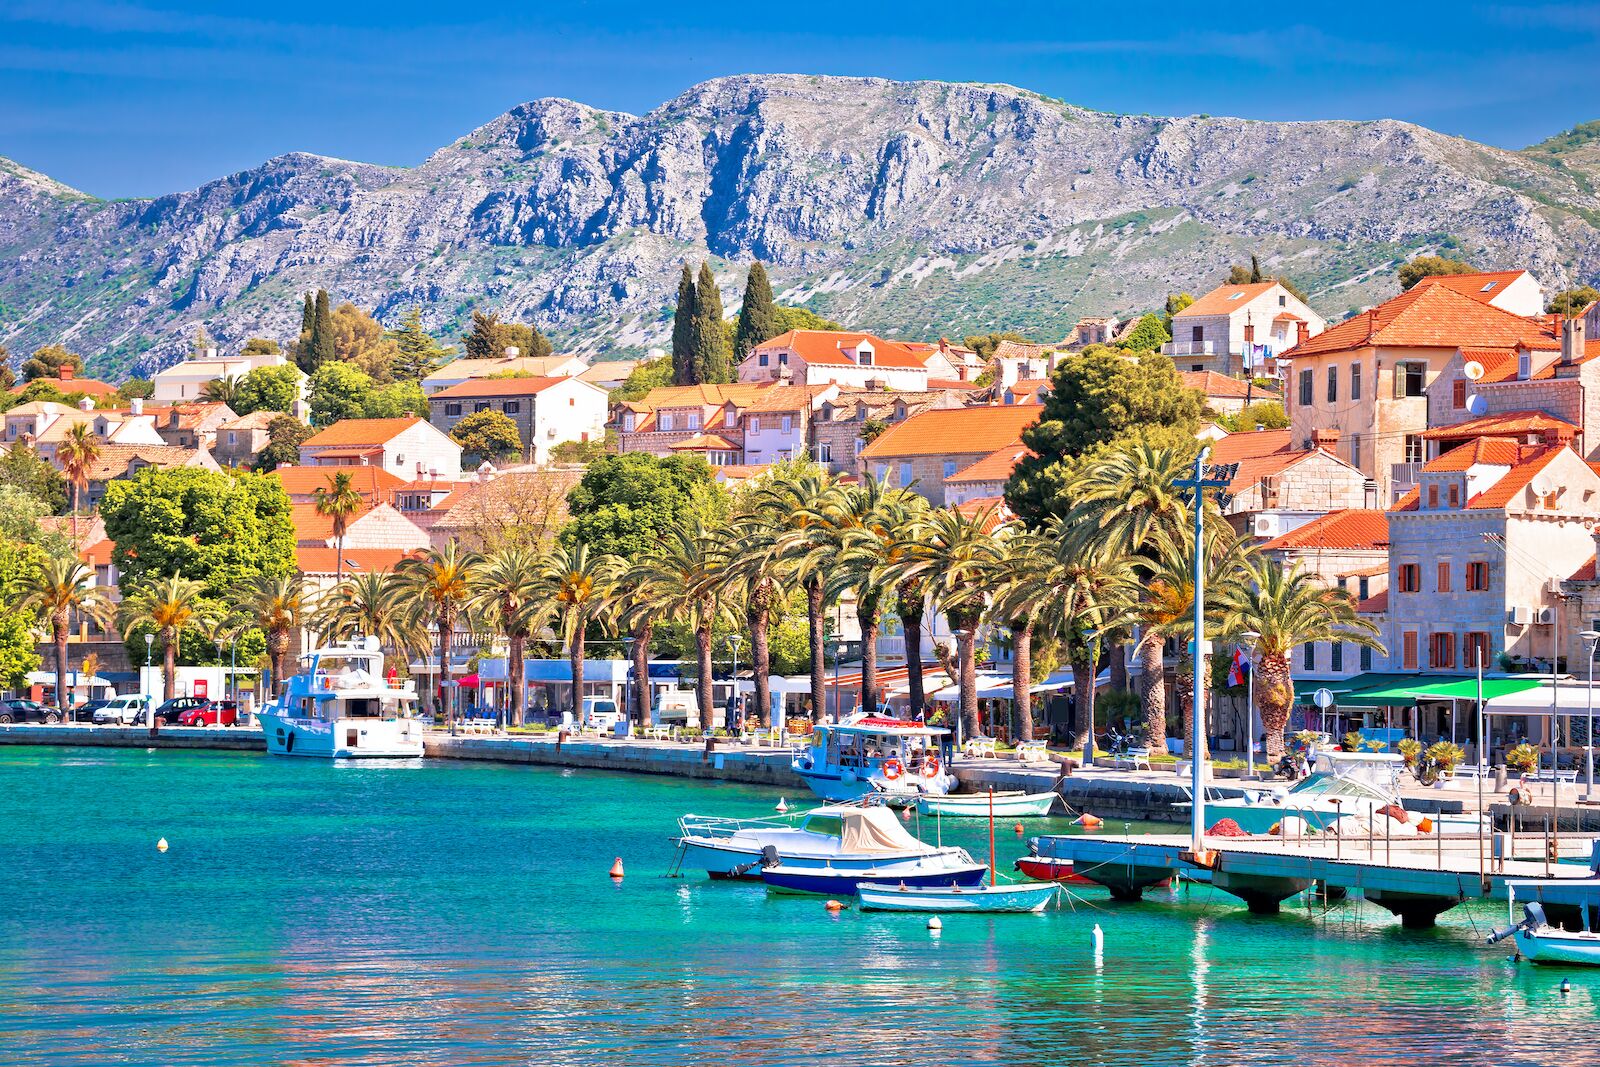 The picturesque town of Cavtat with mountains and the turquoise waters of the bay